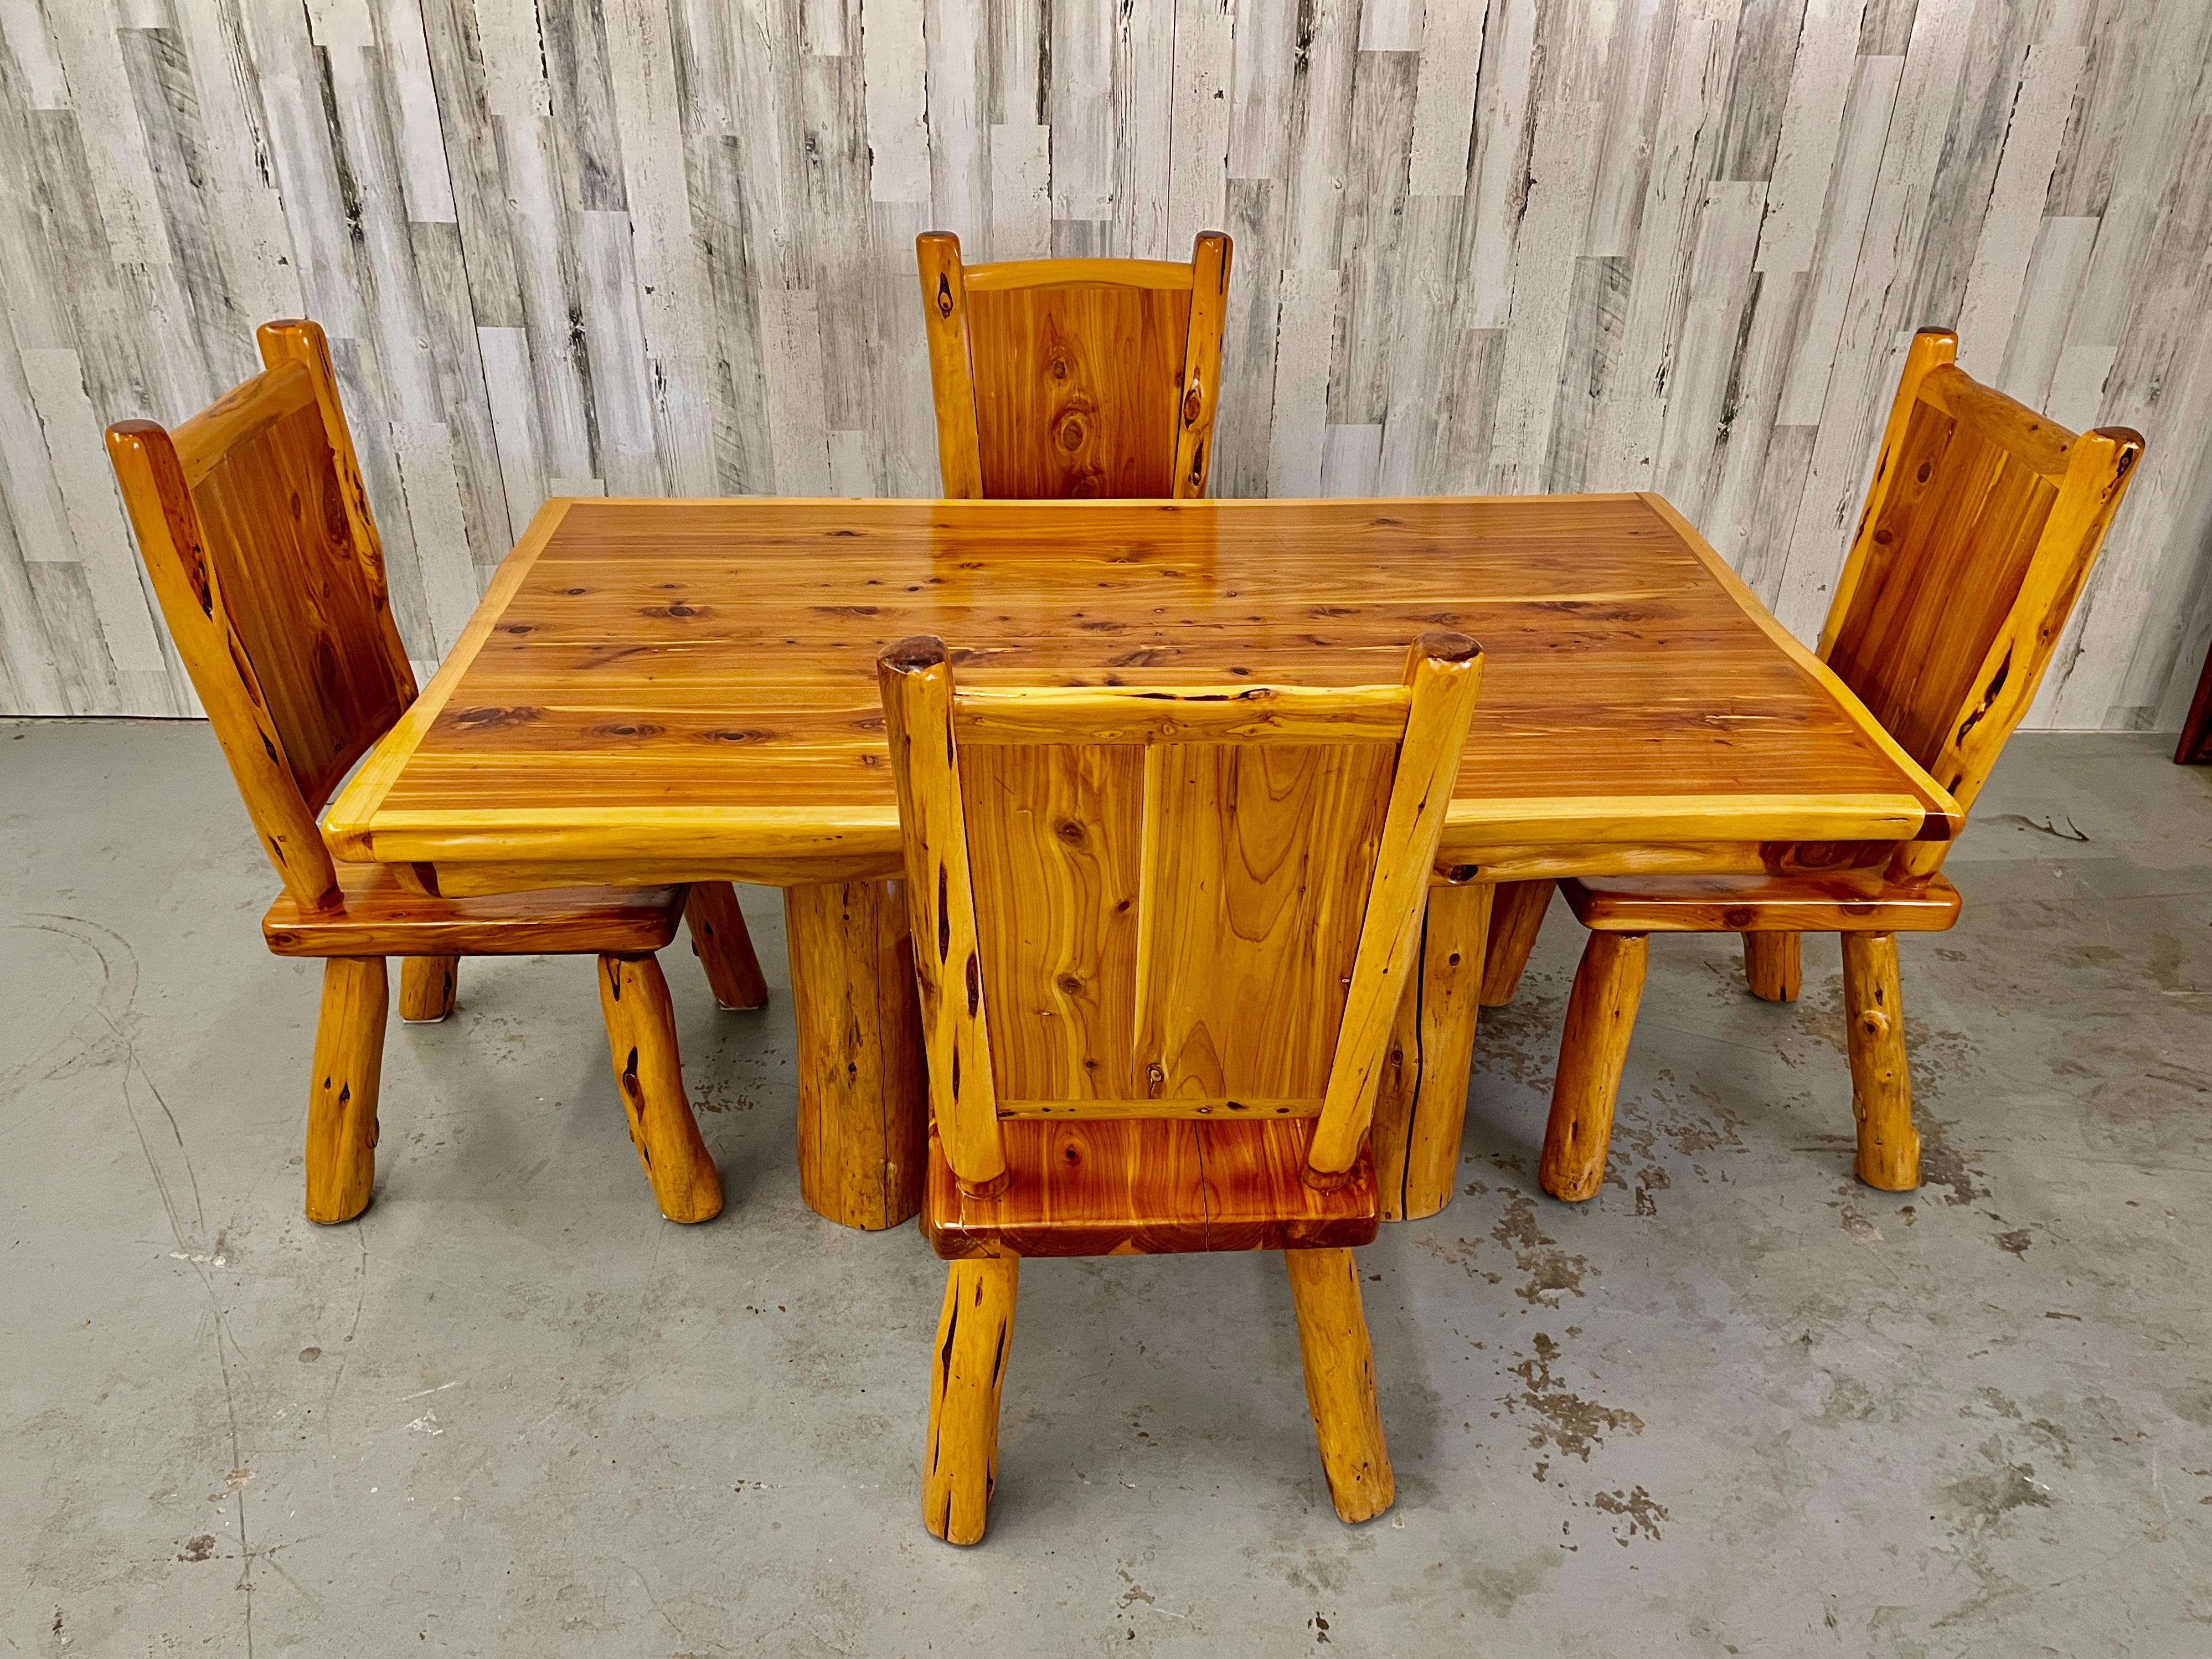 pine table and chairs